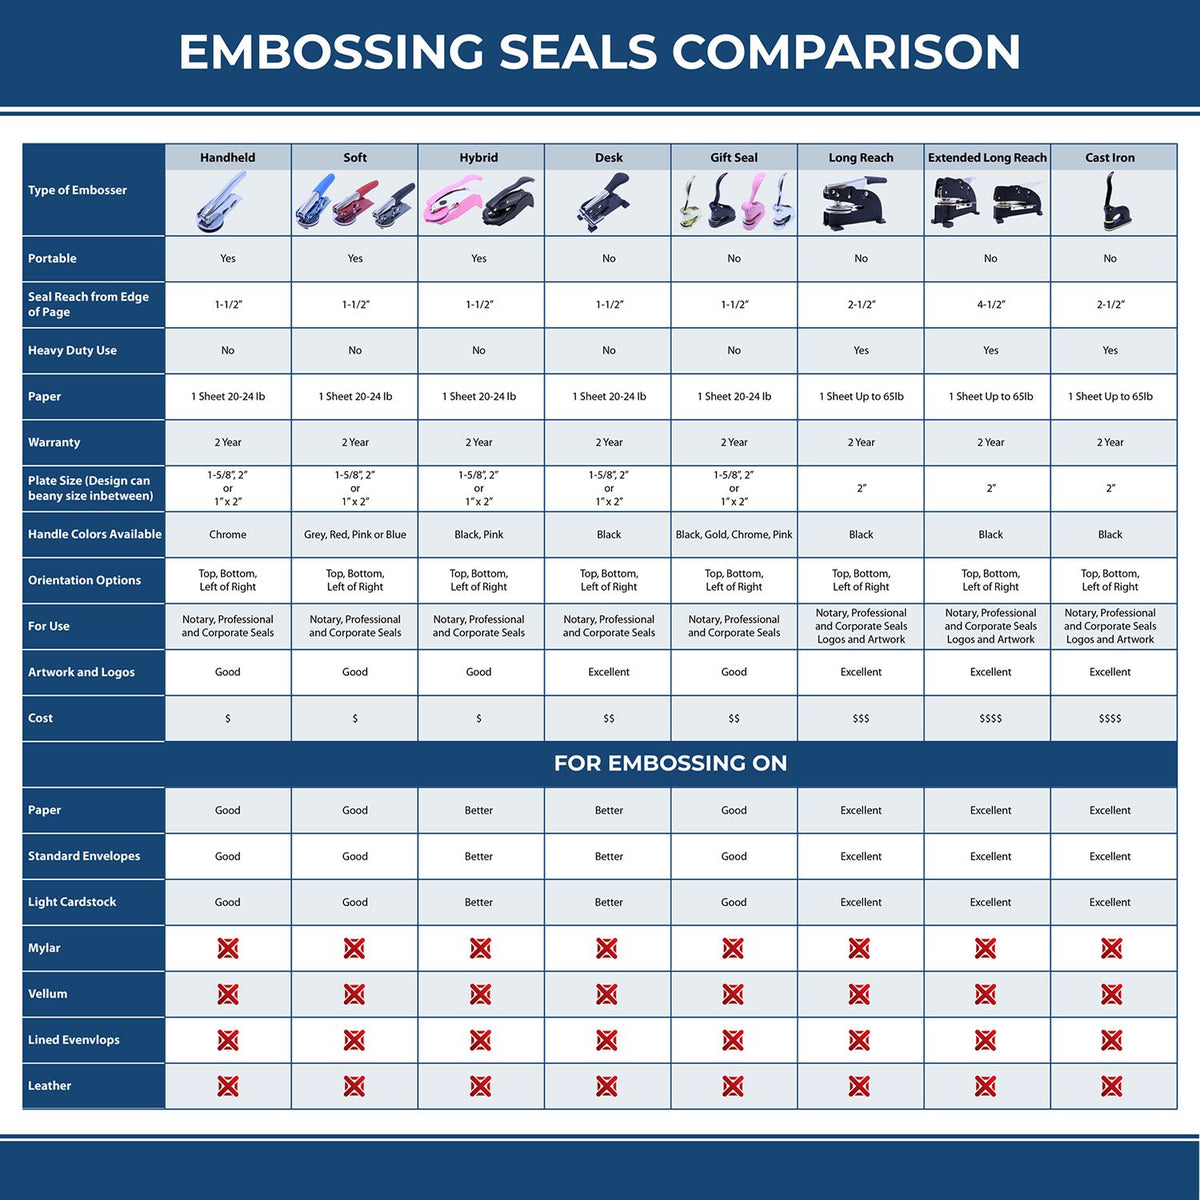 A comparison chart for the different types of mount models available for the Hybrid Utah Land Surveyor Seal